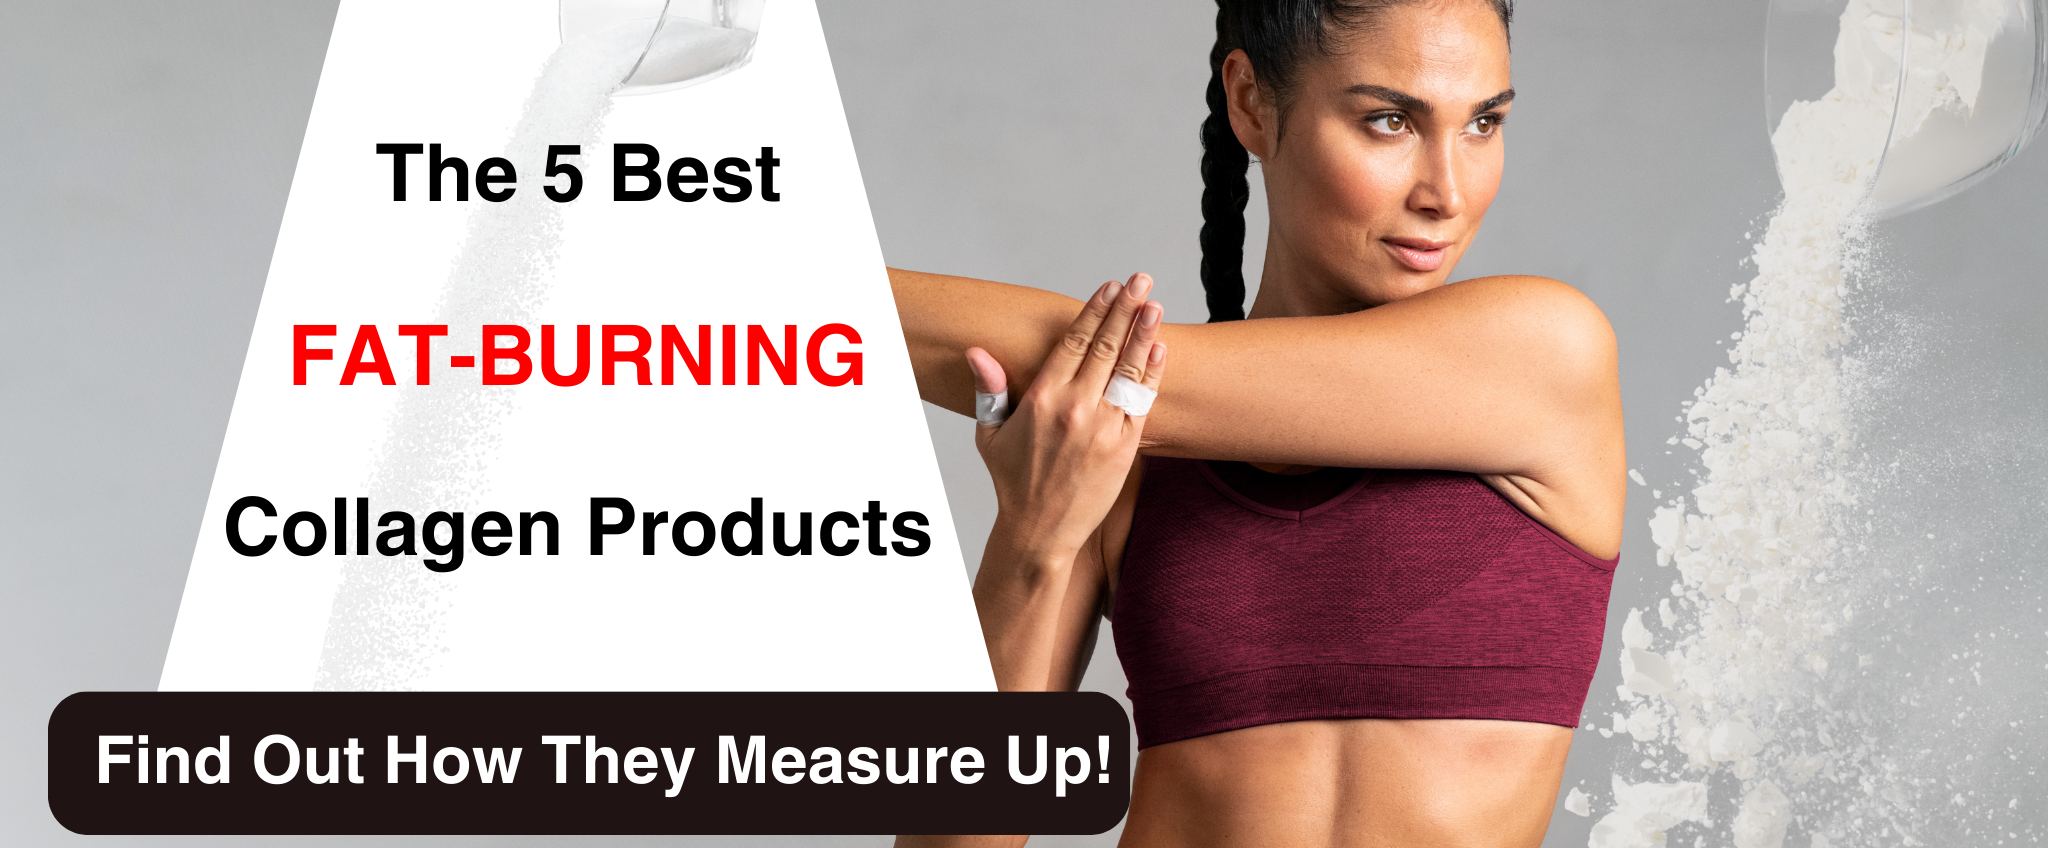 5 best fat burning collagen products